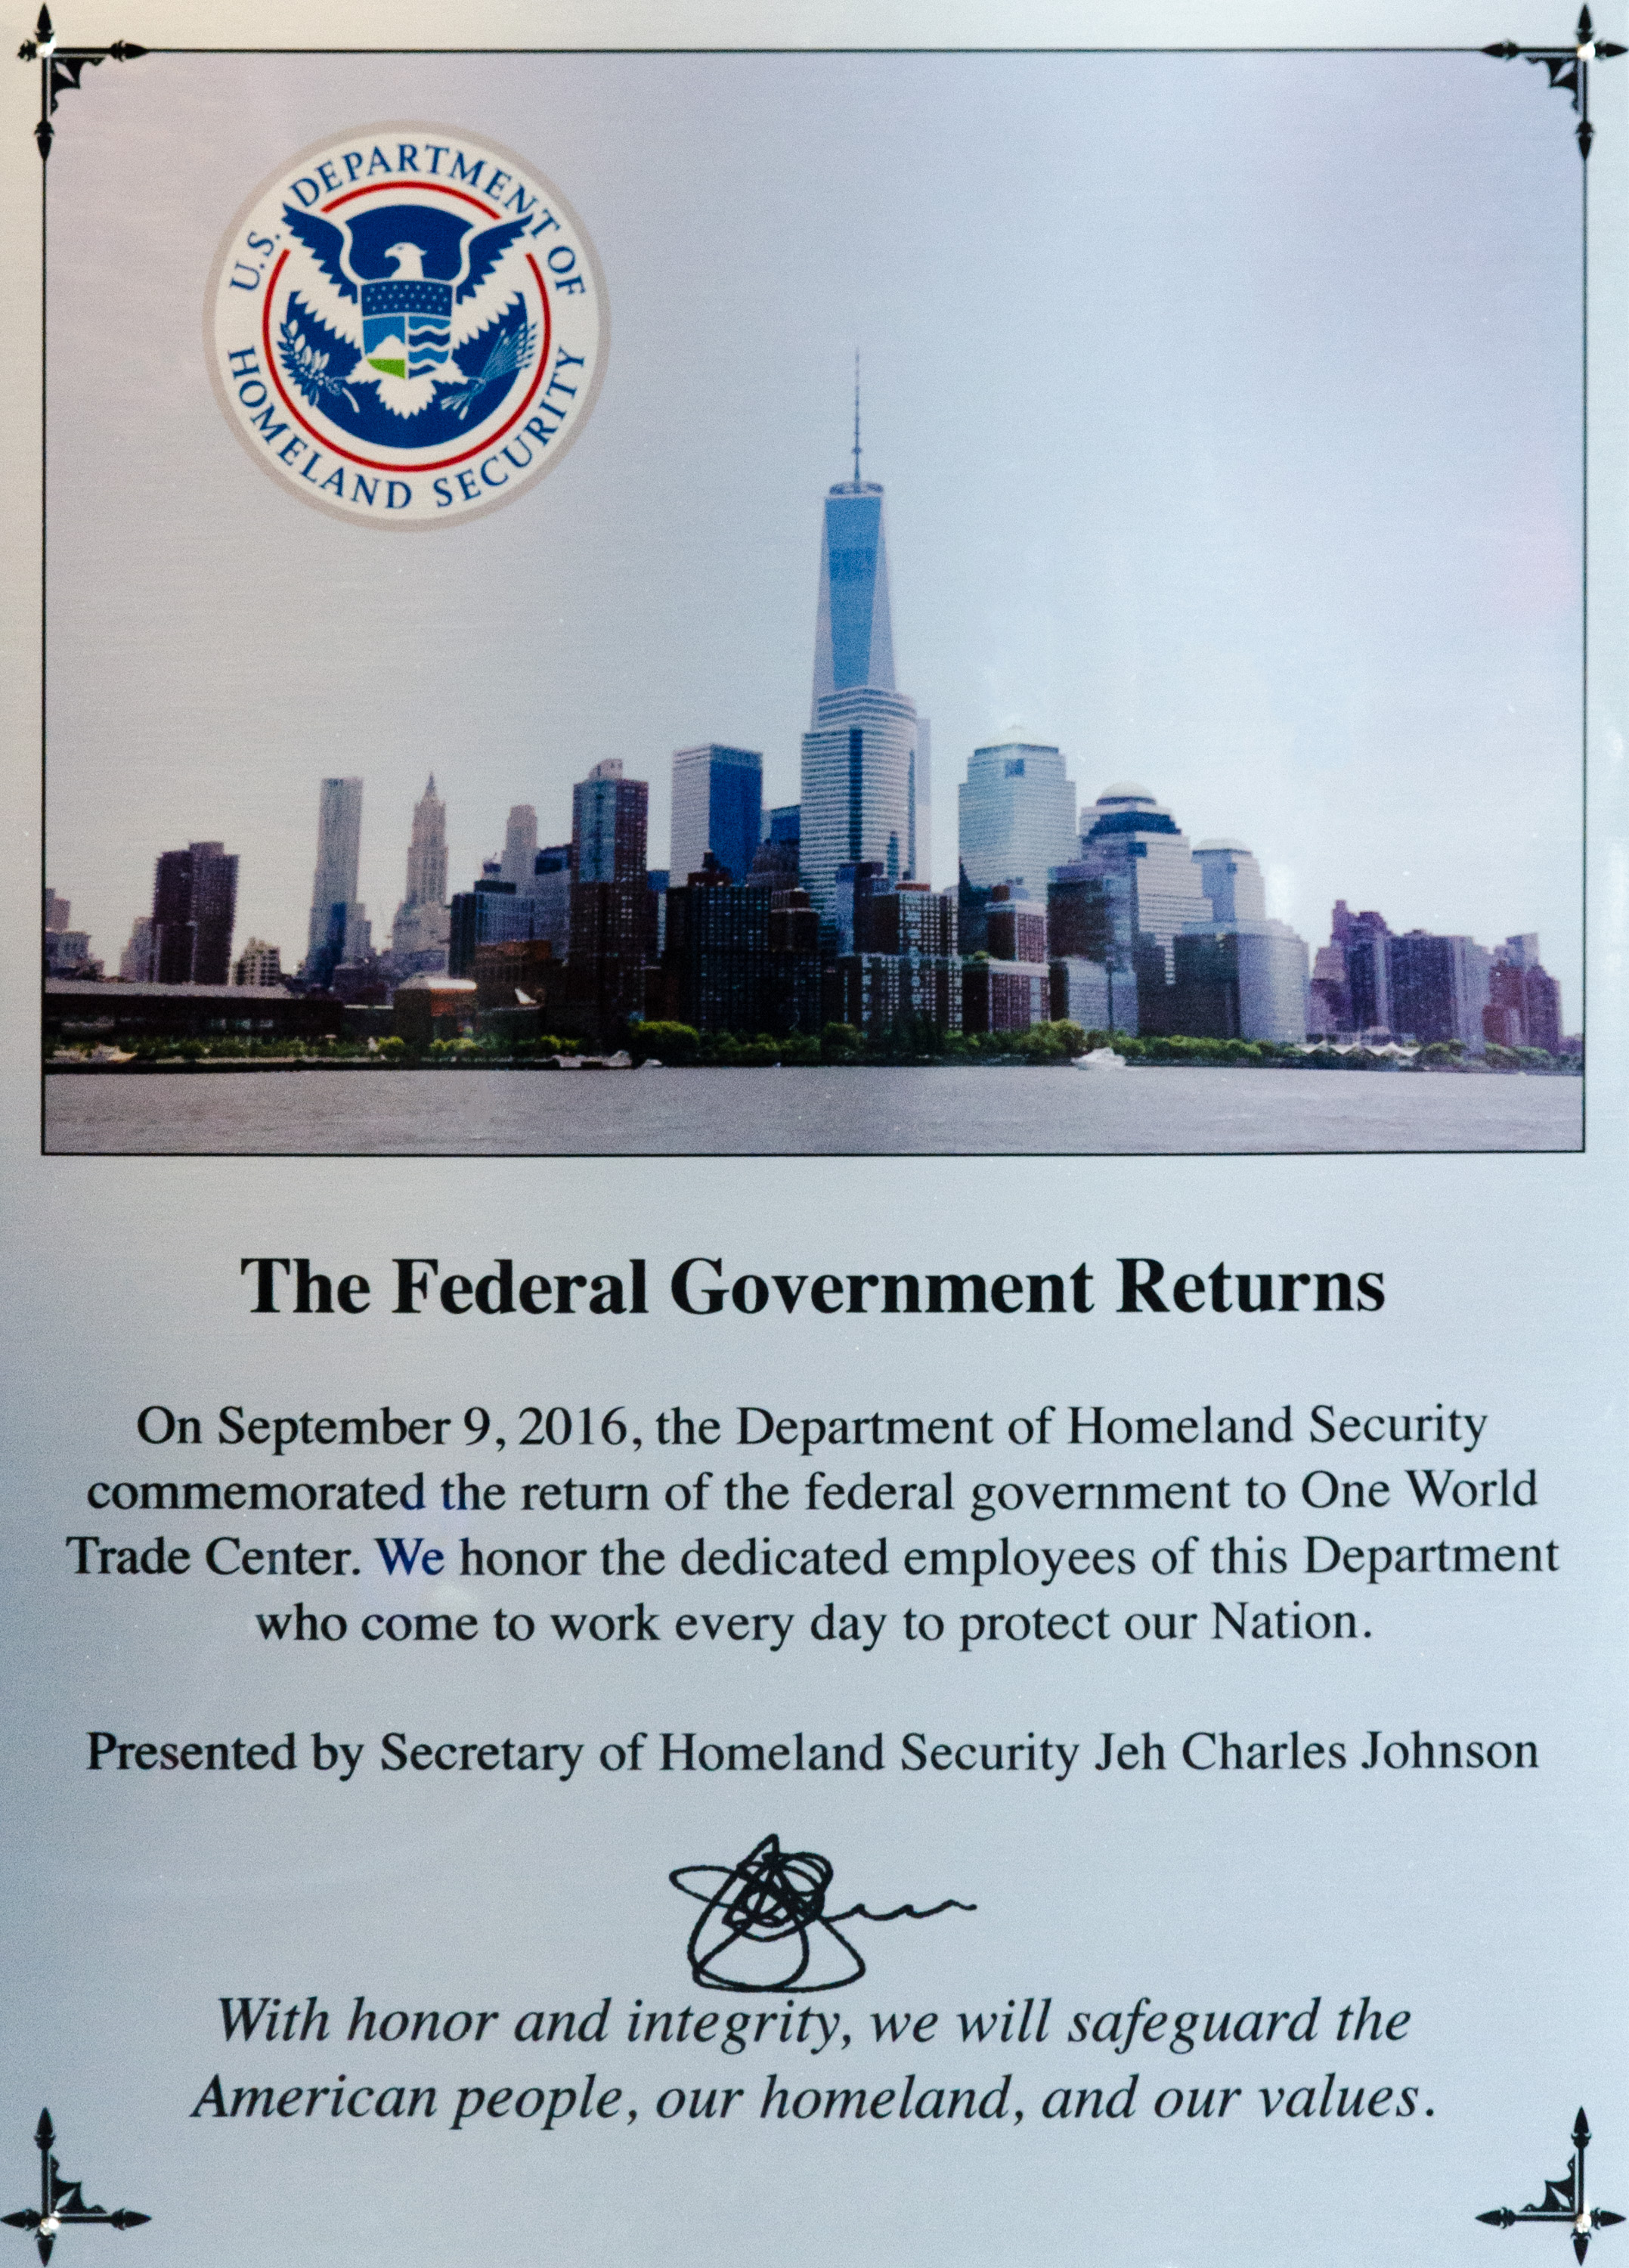 Sign announcing the federal government returned to 1 World Trade Center in 2003